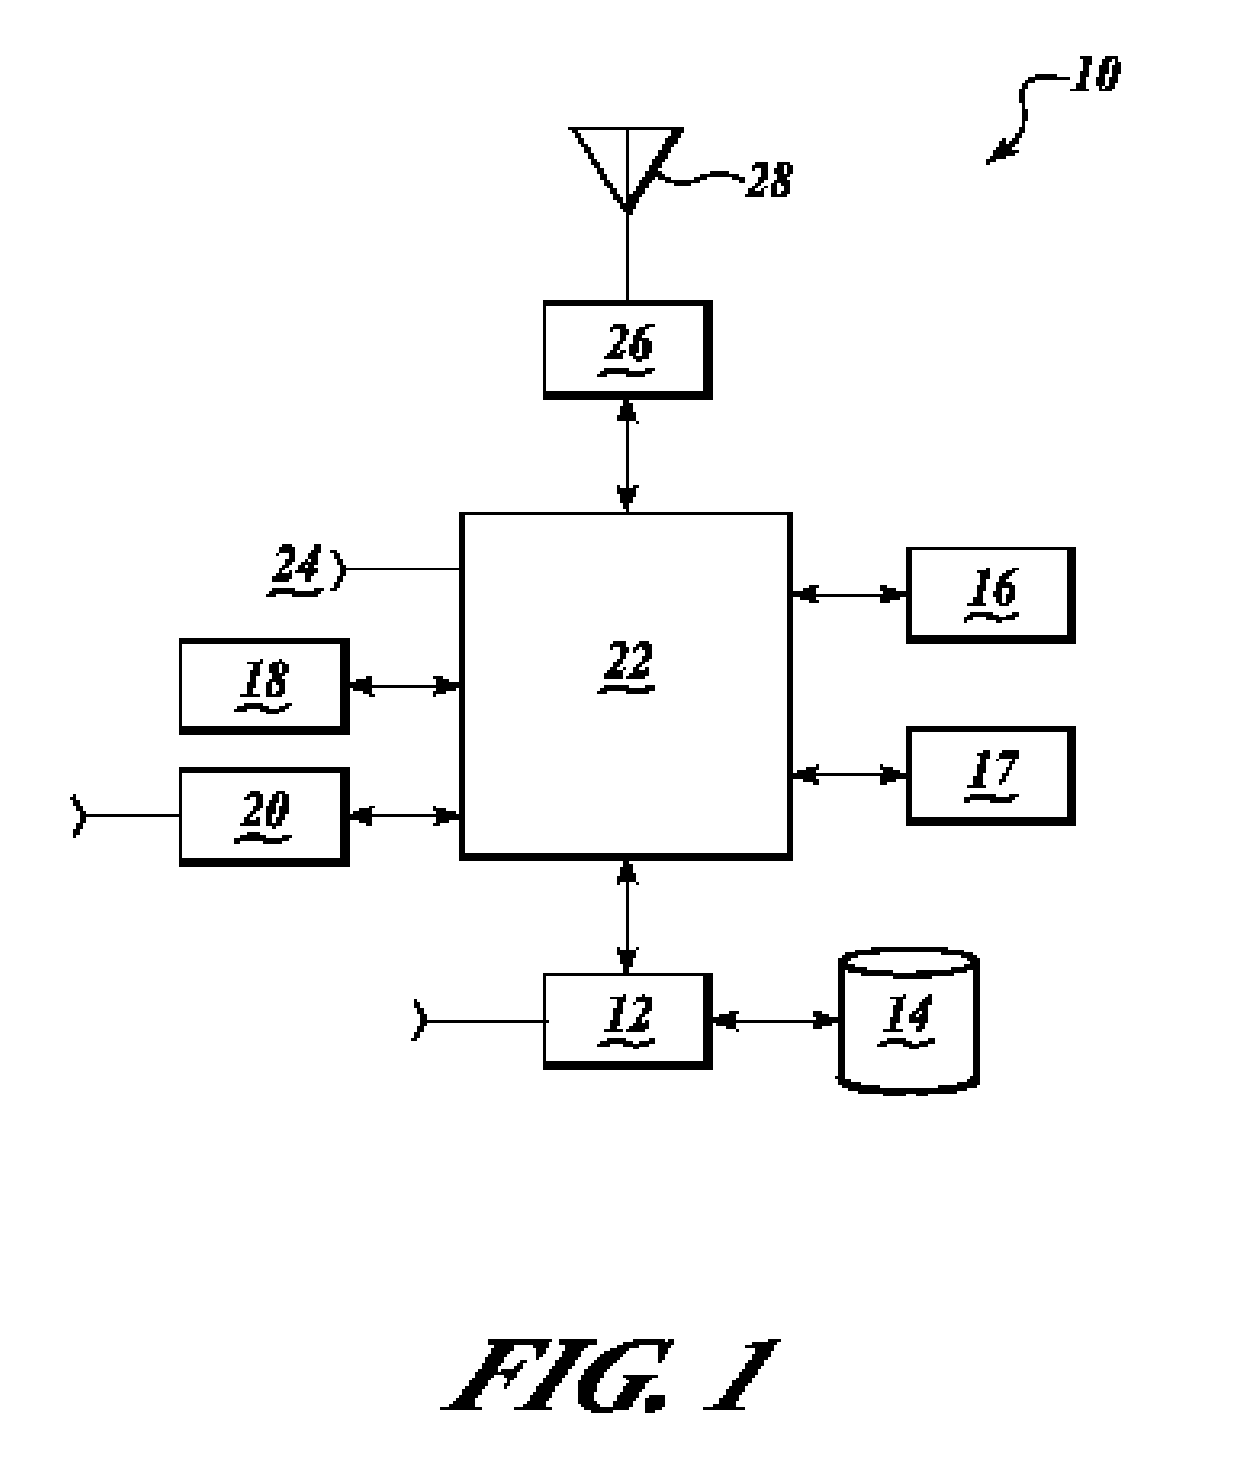 Adaptive communications system and method